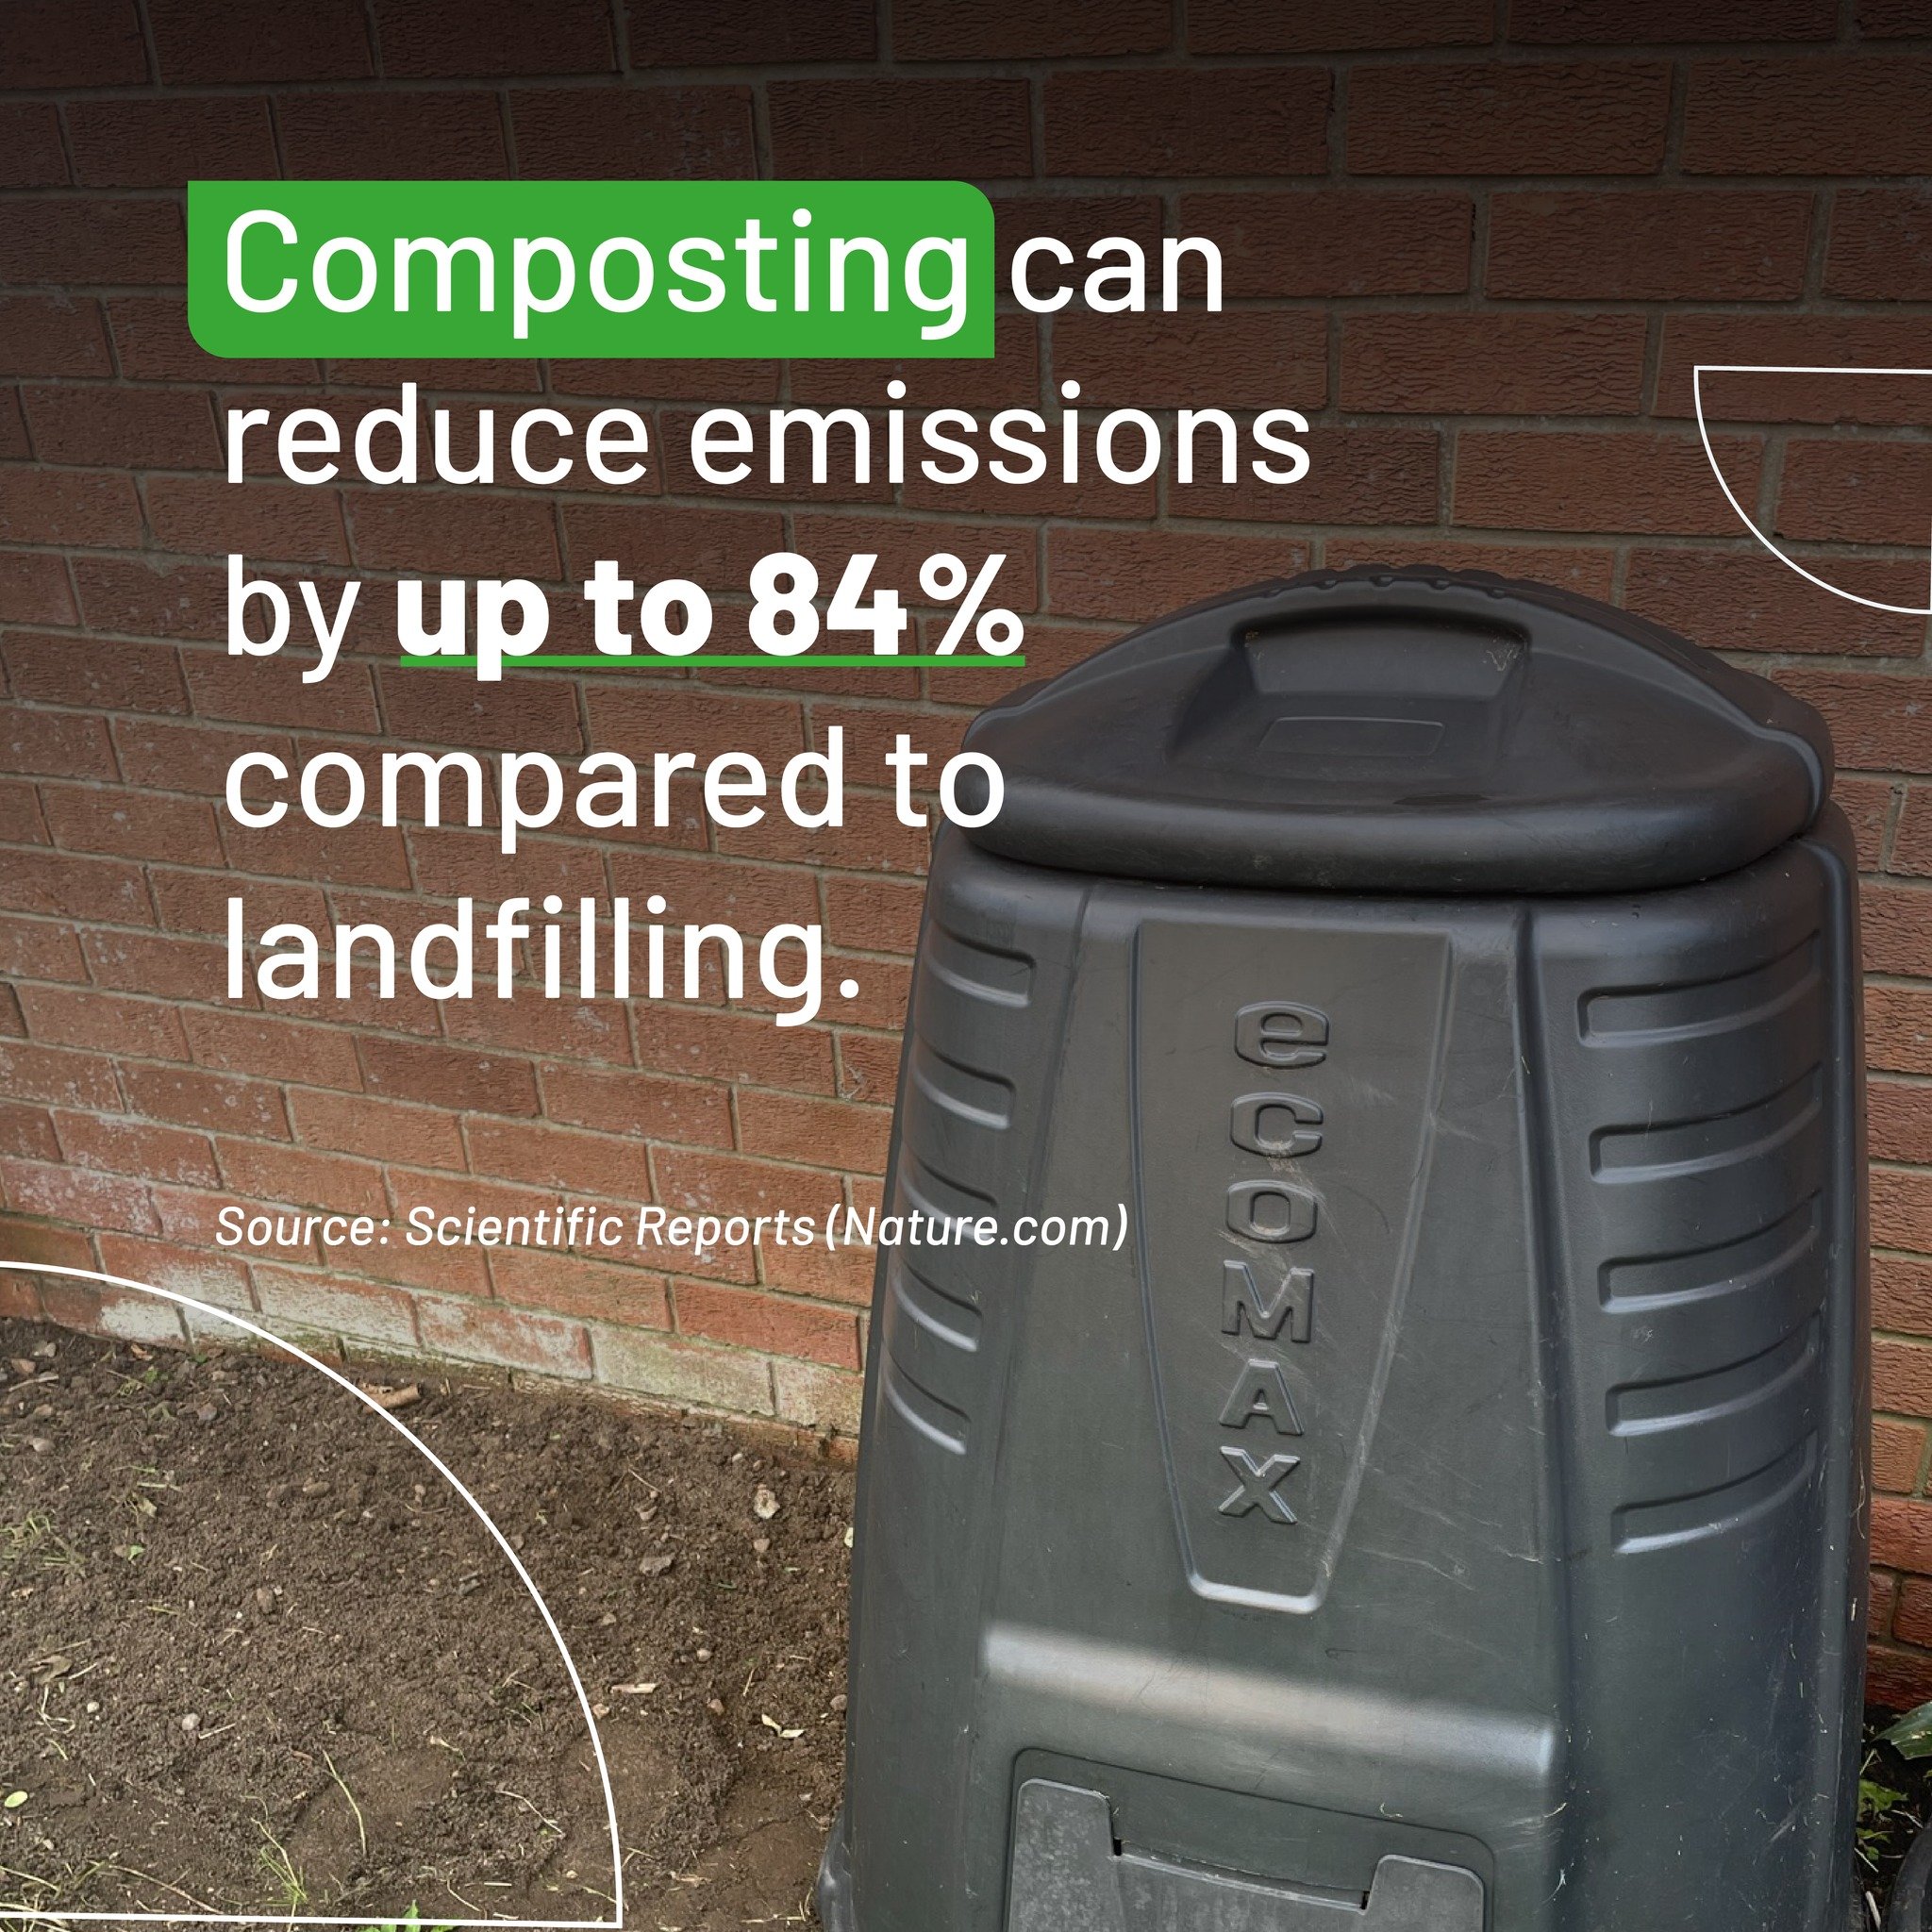 🌱 Transforming waste into environmental solutions with composting! 🌍

With the potential emissions reductions of up to 84% compared to landfilling, composting is not just about reducing waste but also reducing greenhouse gasses! 🌿 Composting helps